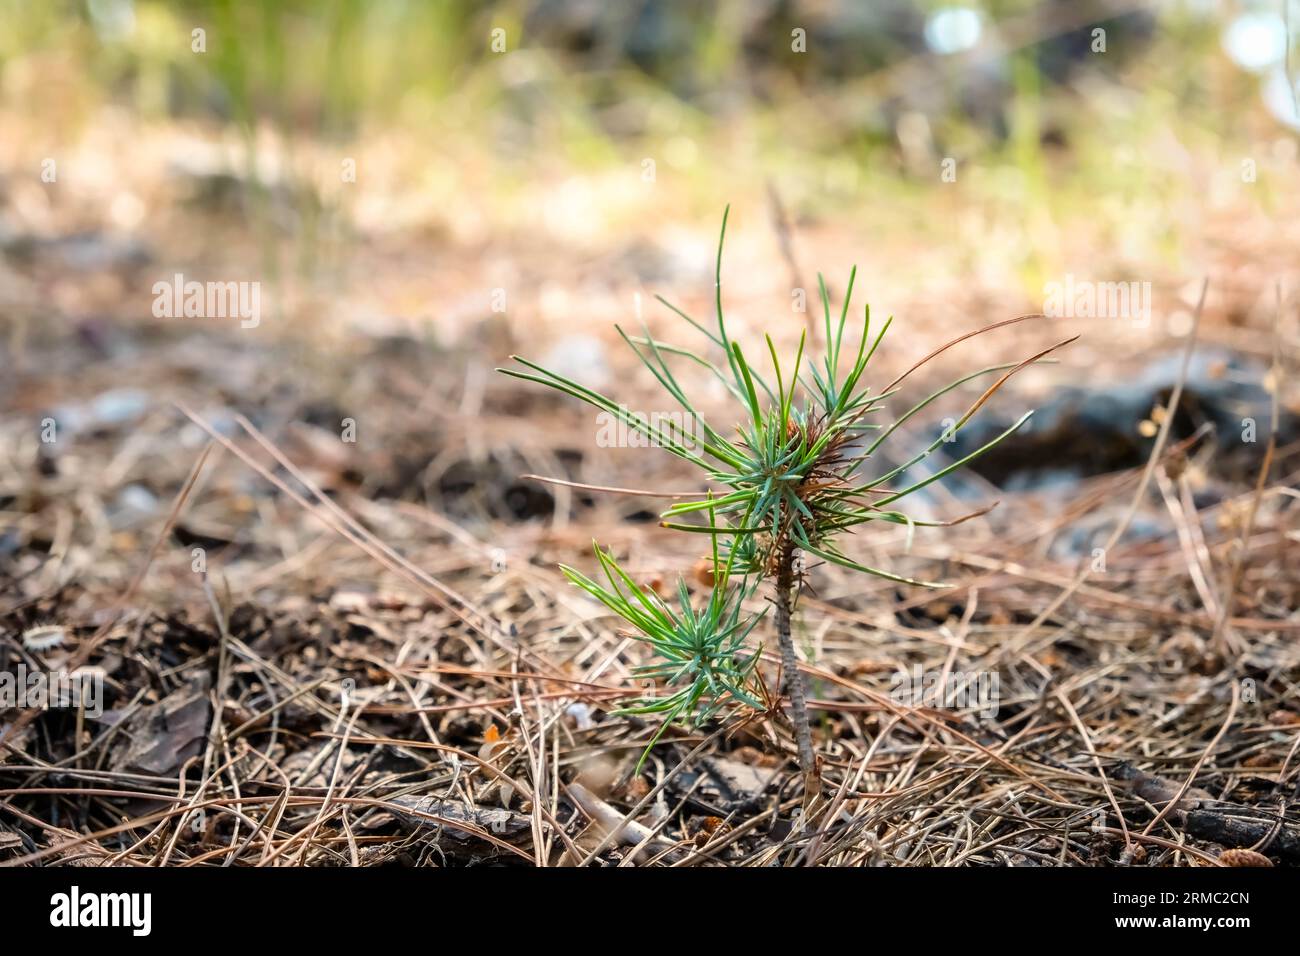 Afforestation and regrow forests. New growth of a small pine sapling and grass growing on the forest floor next to burnt trees after the devastation o Stock Photo